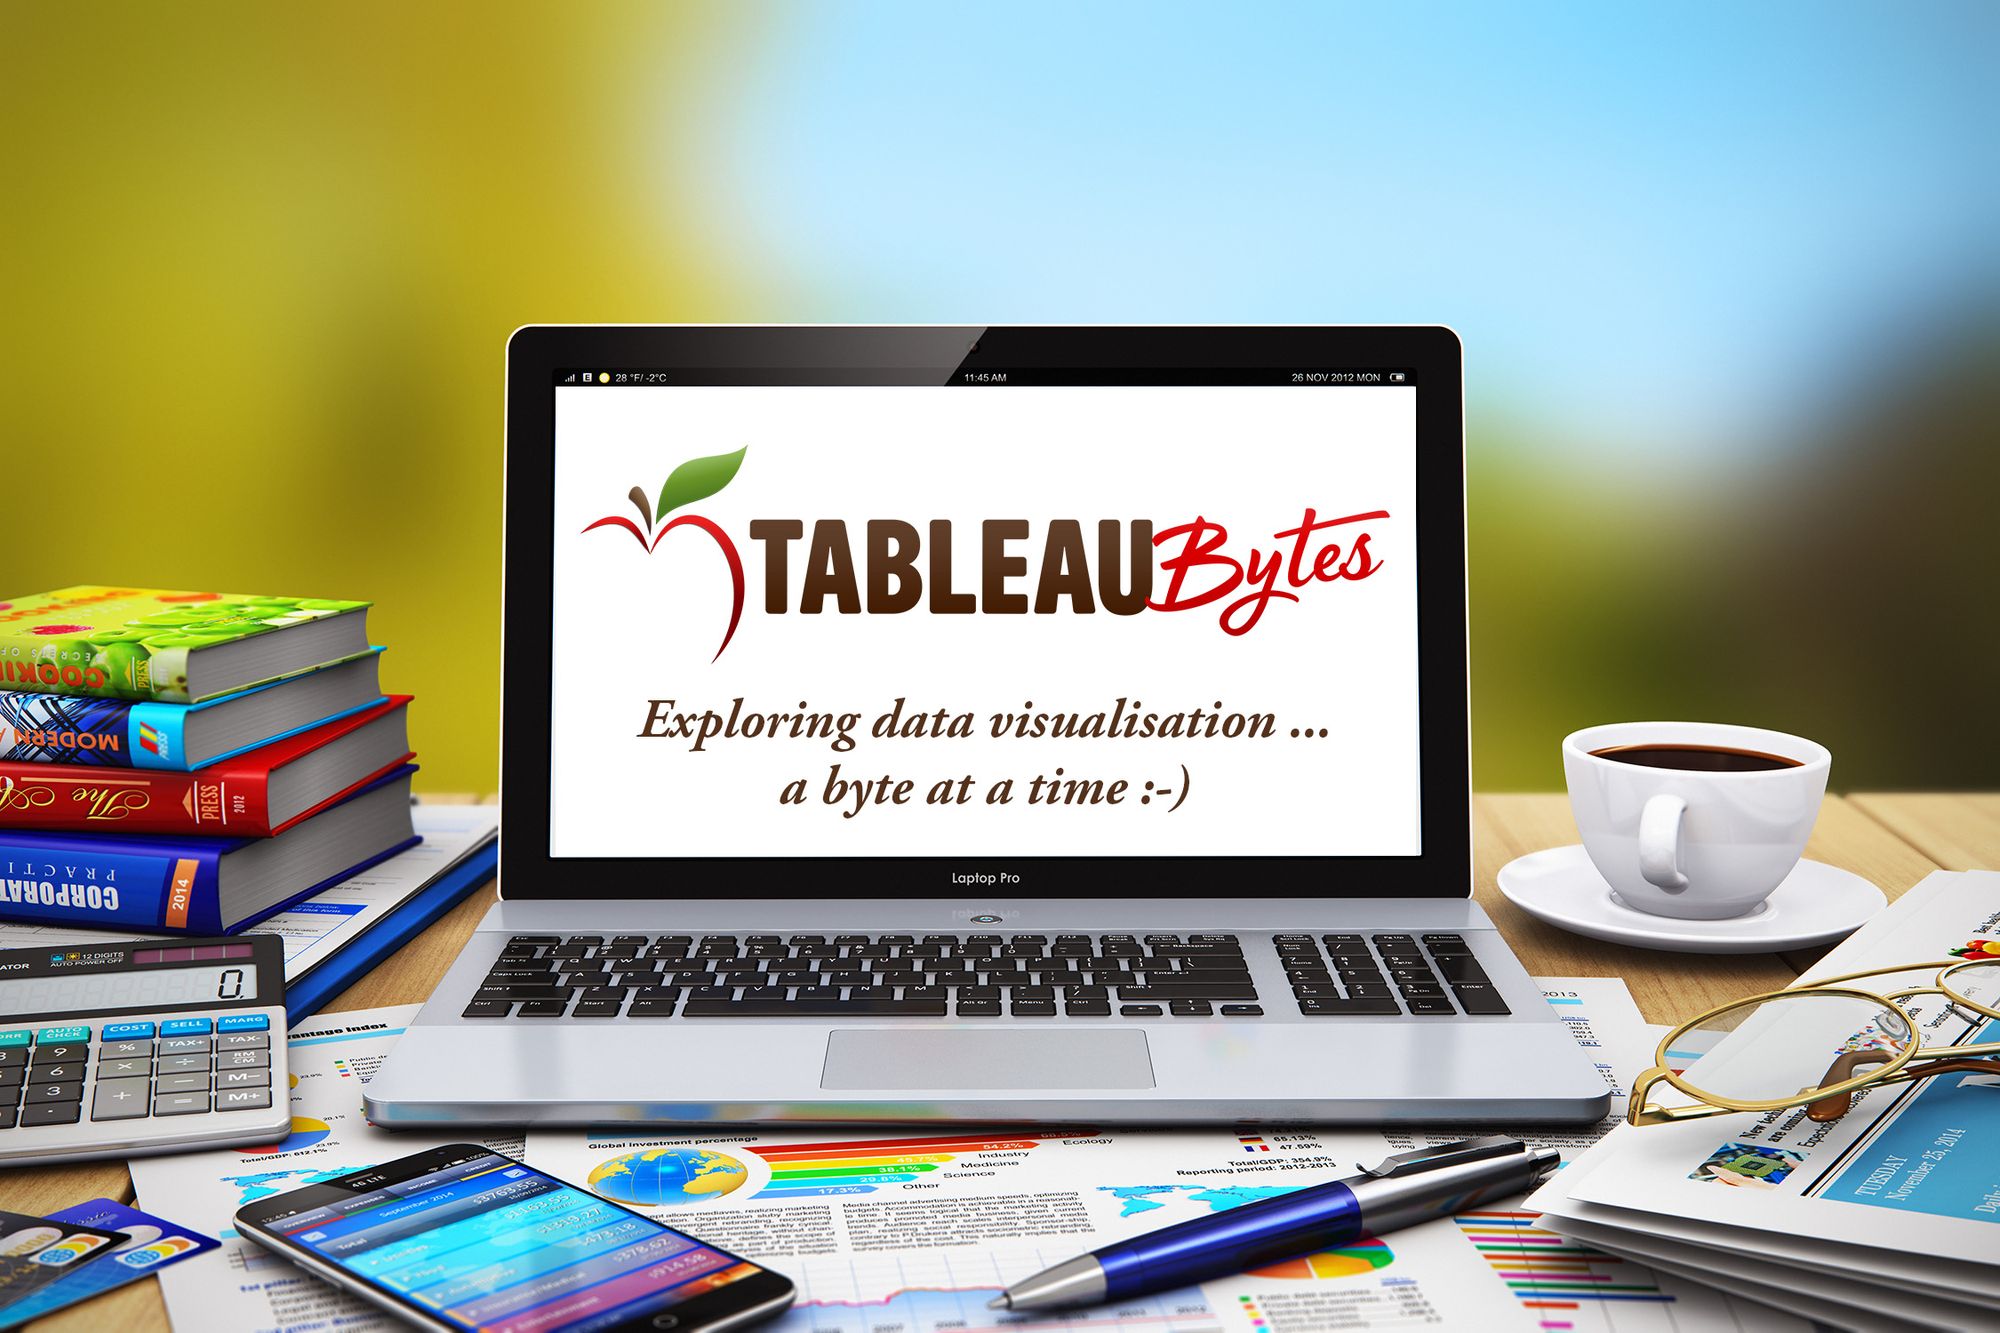 A laptop on a table surrounded by books and items on a desk. The laptop has the TableauBytes logo displayed on the screen.